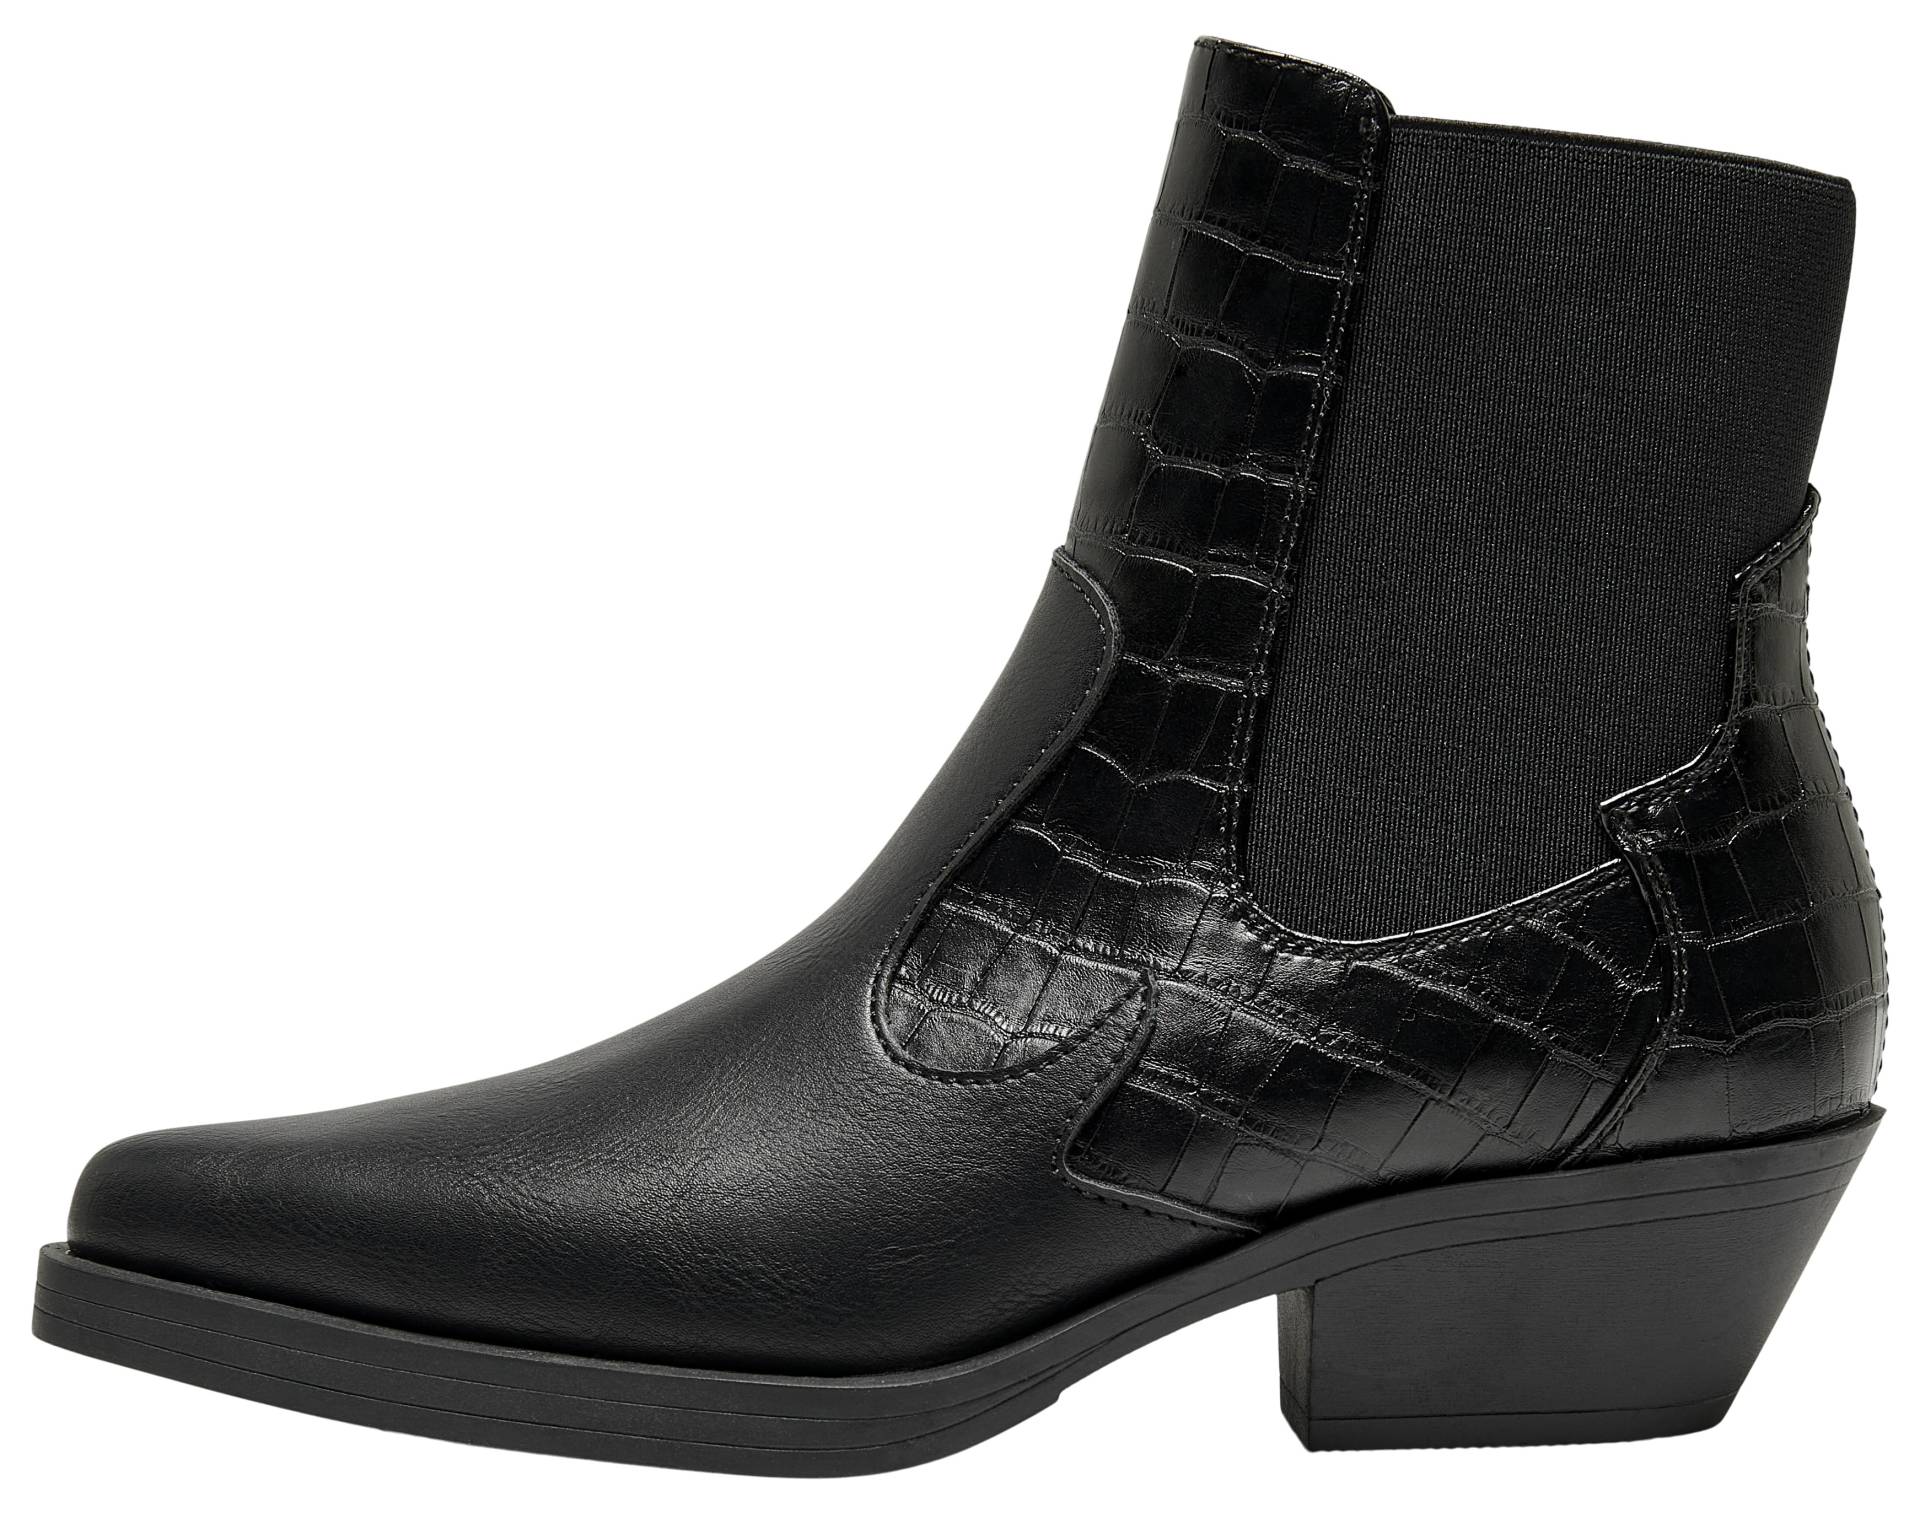 ONLY Shoes Westernstiefelette »ONLBRONCO-2« von ONLY Shoes